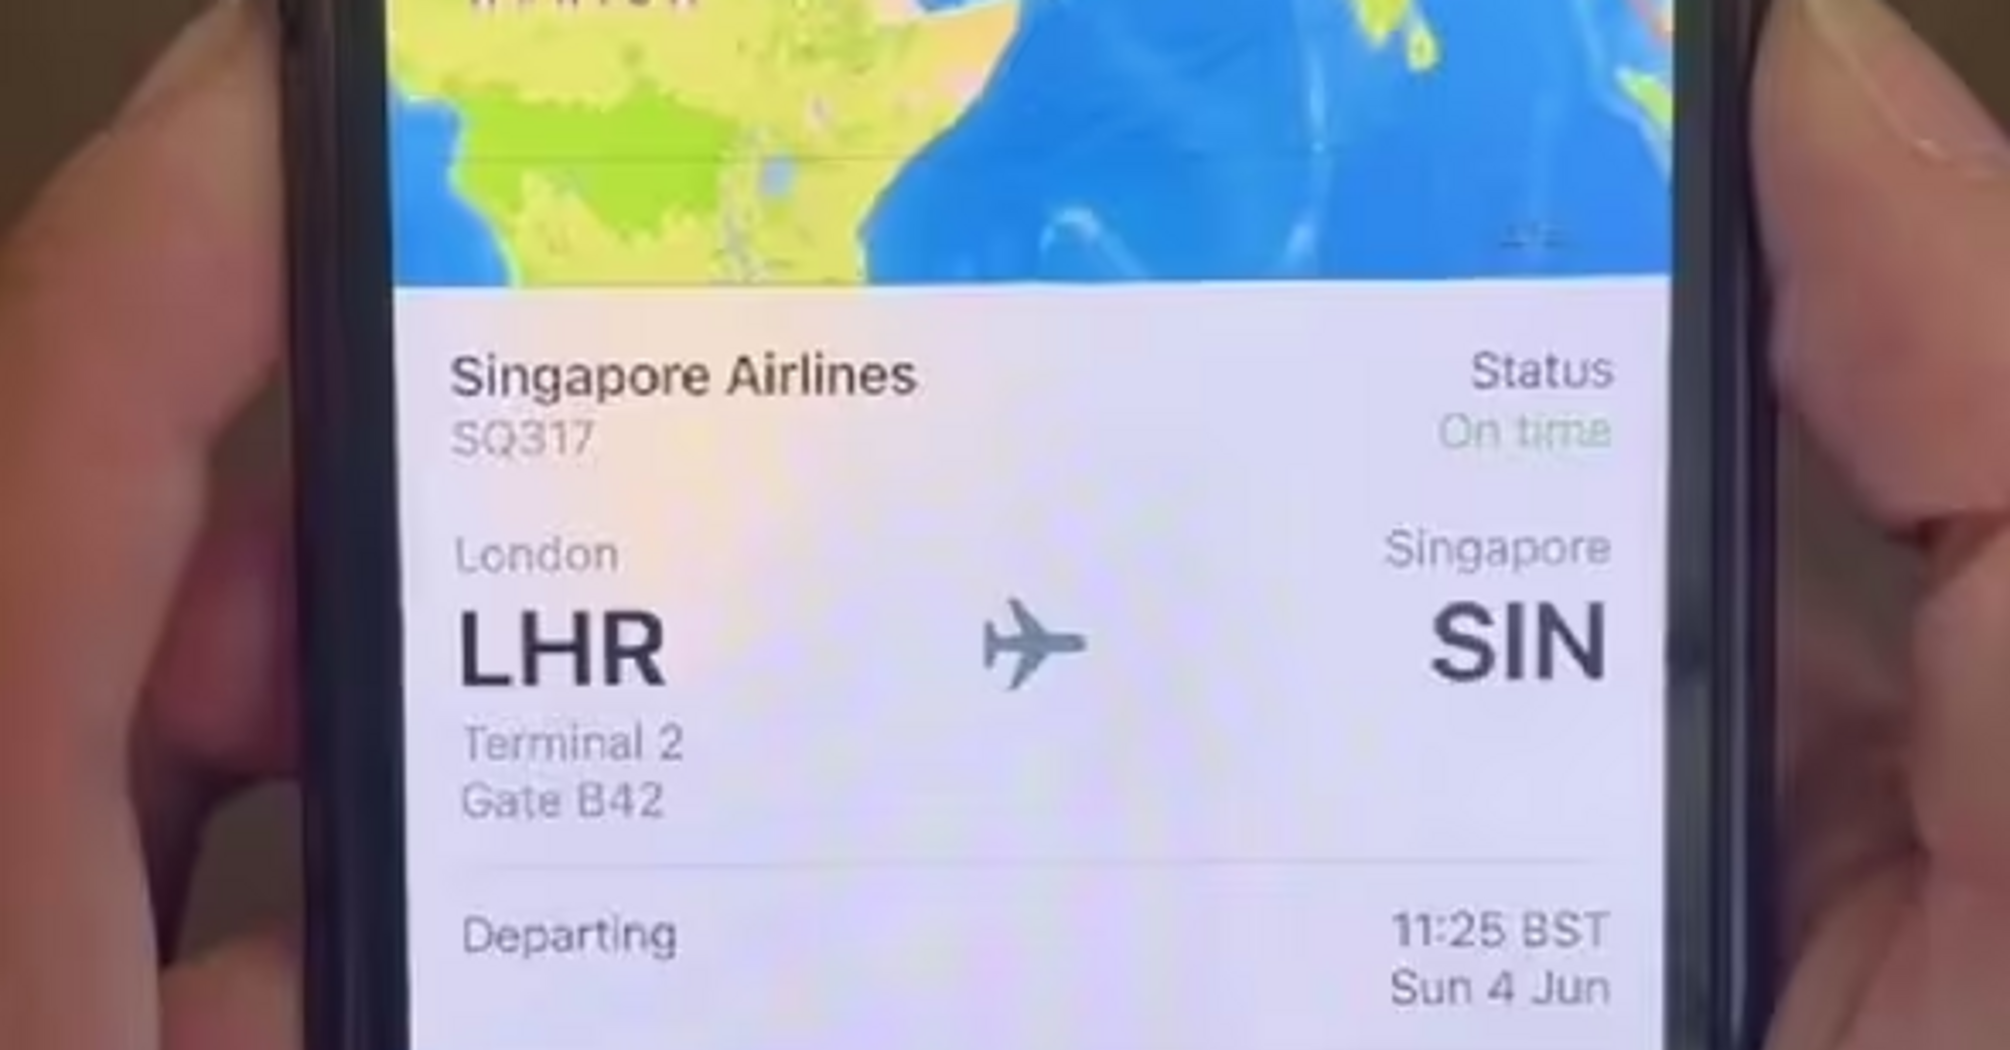 How to find out if the plane has arrived: a simple life hack from a blogger has garnered nearly a million views